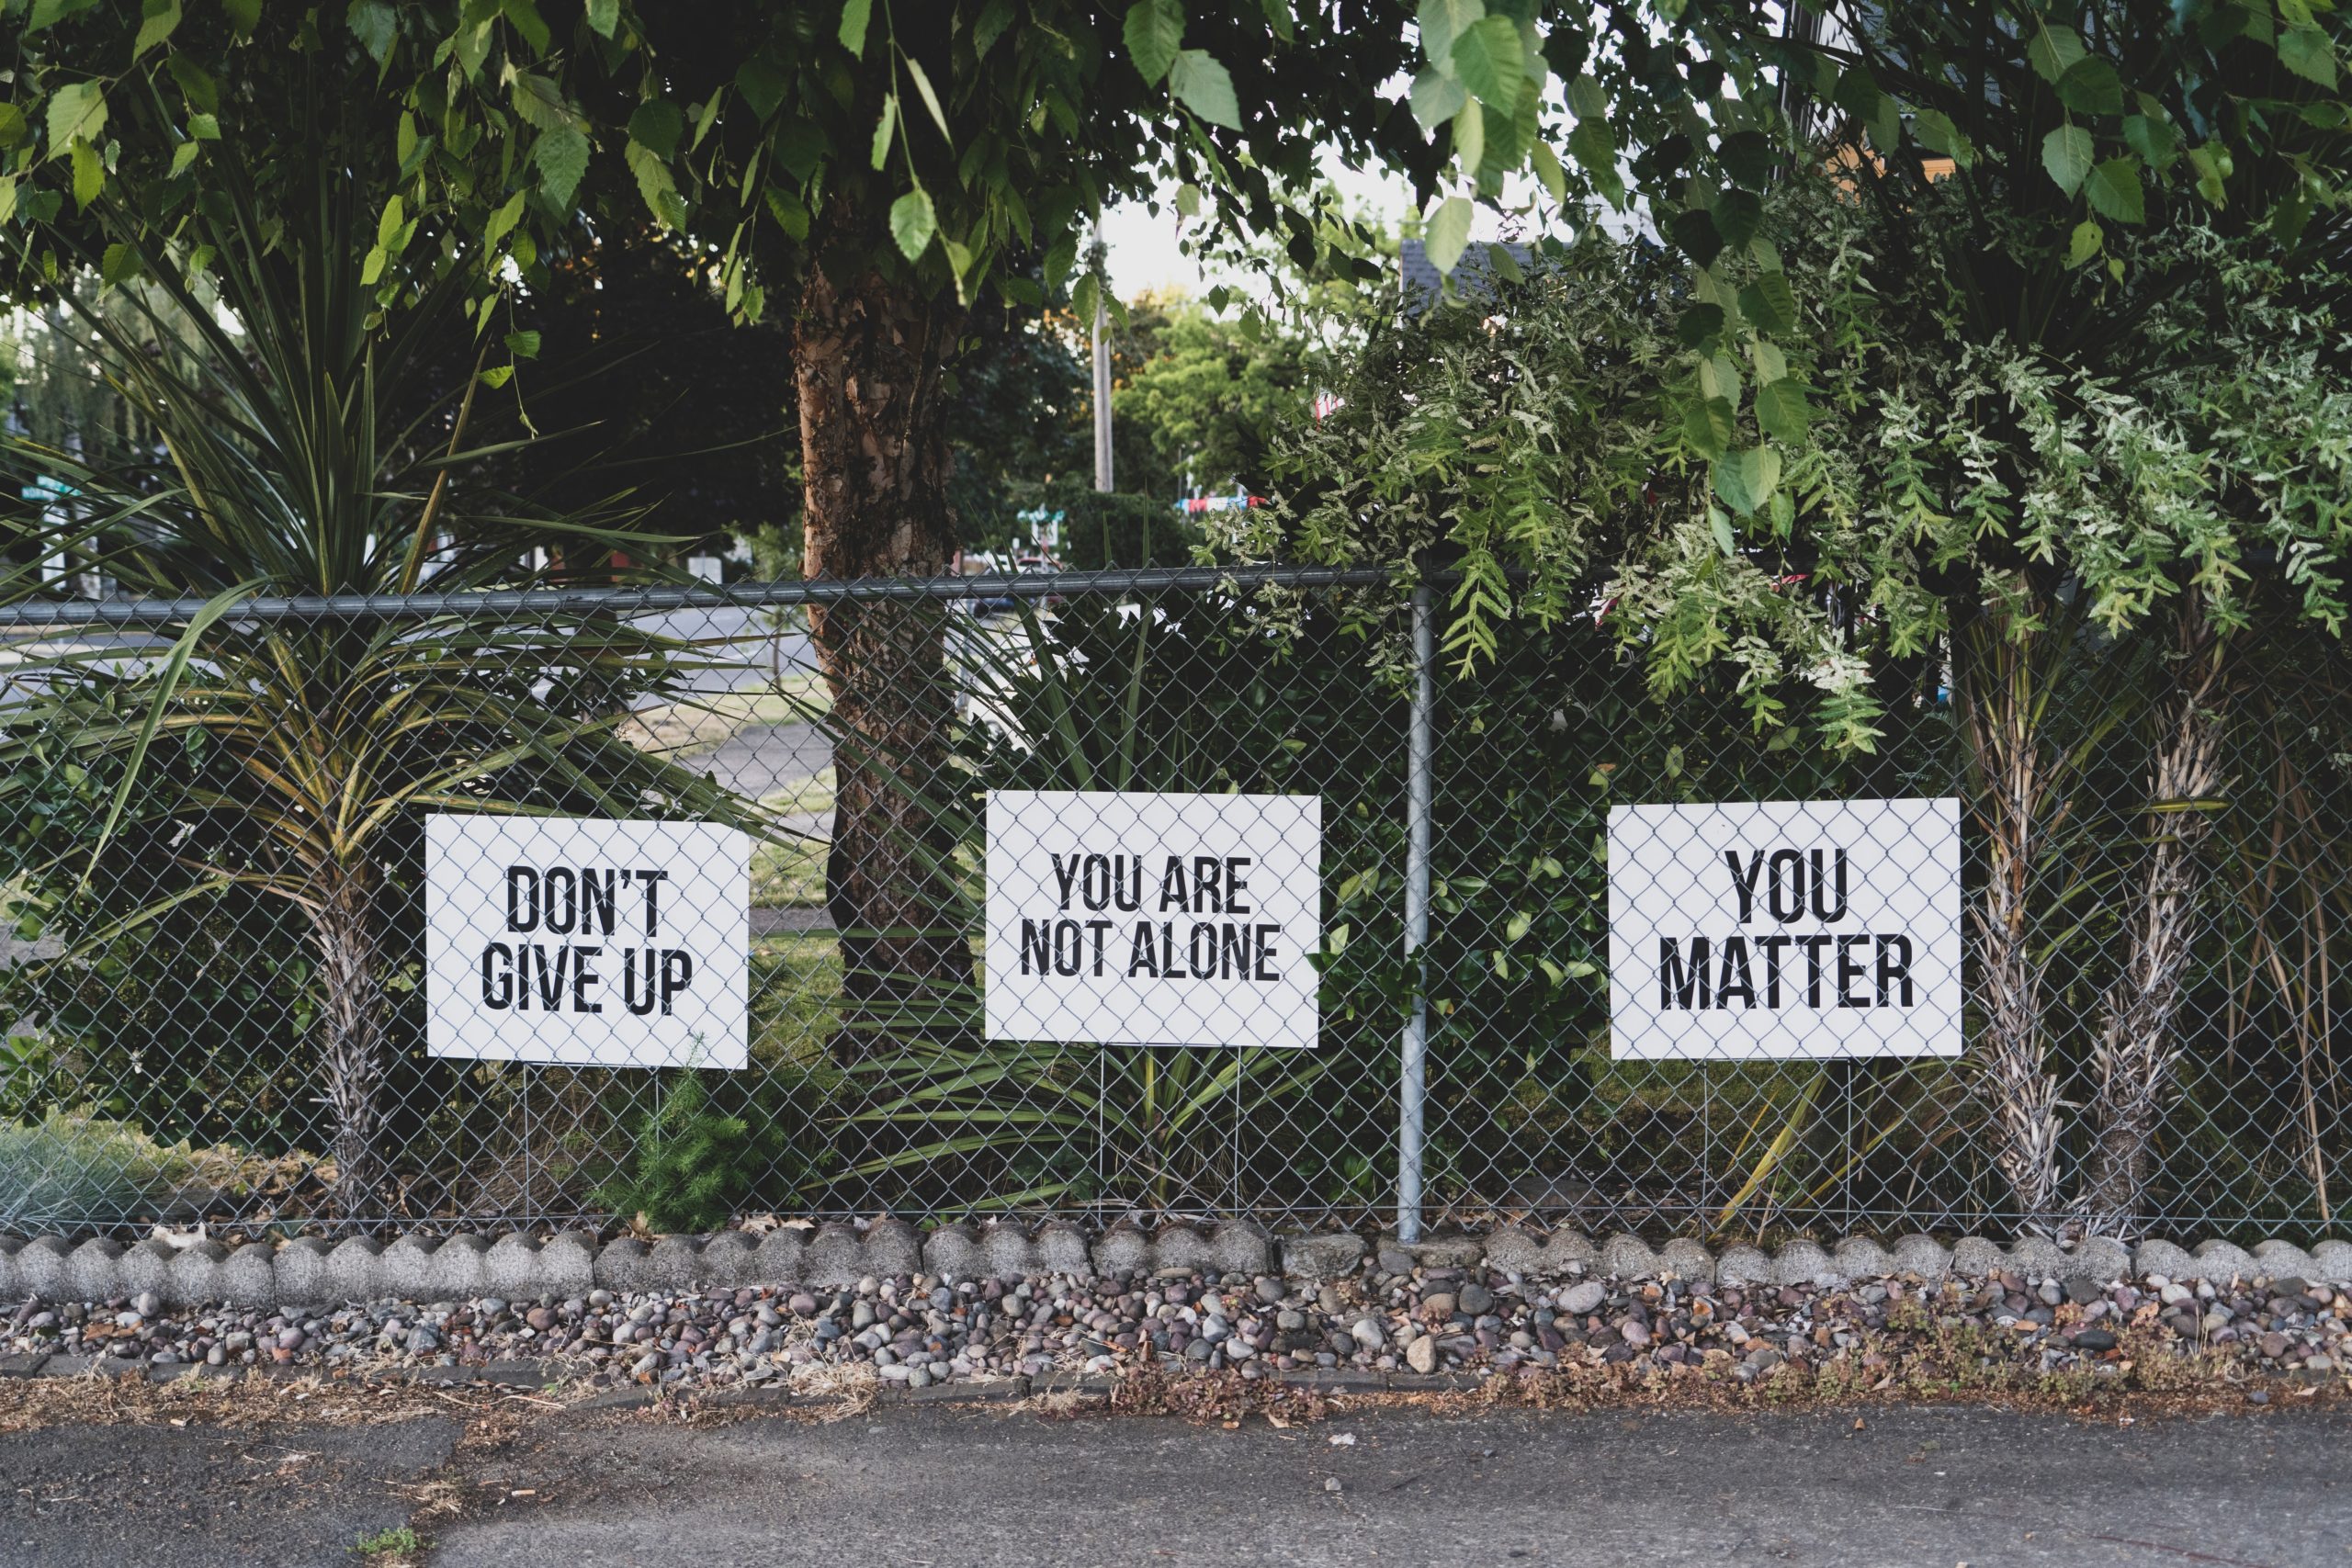 Three signs are attached to a chain link fence. The first sign reads "don't give up." The second sign reads "you are not alone." The third sign reads "you matter."